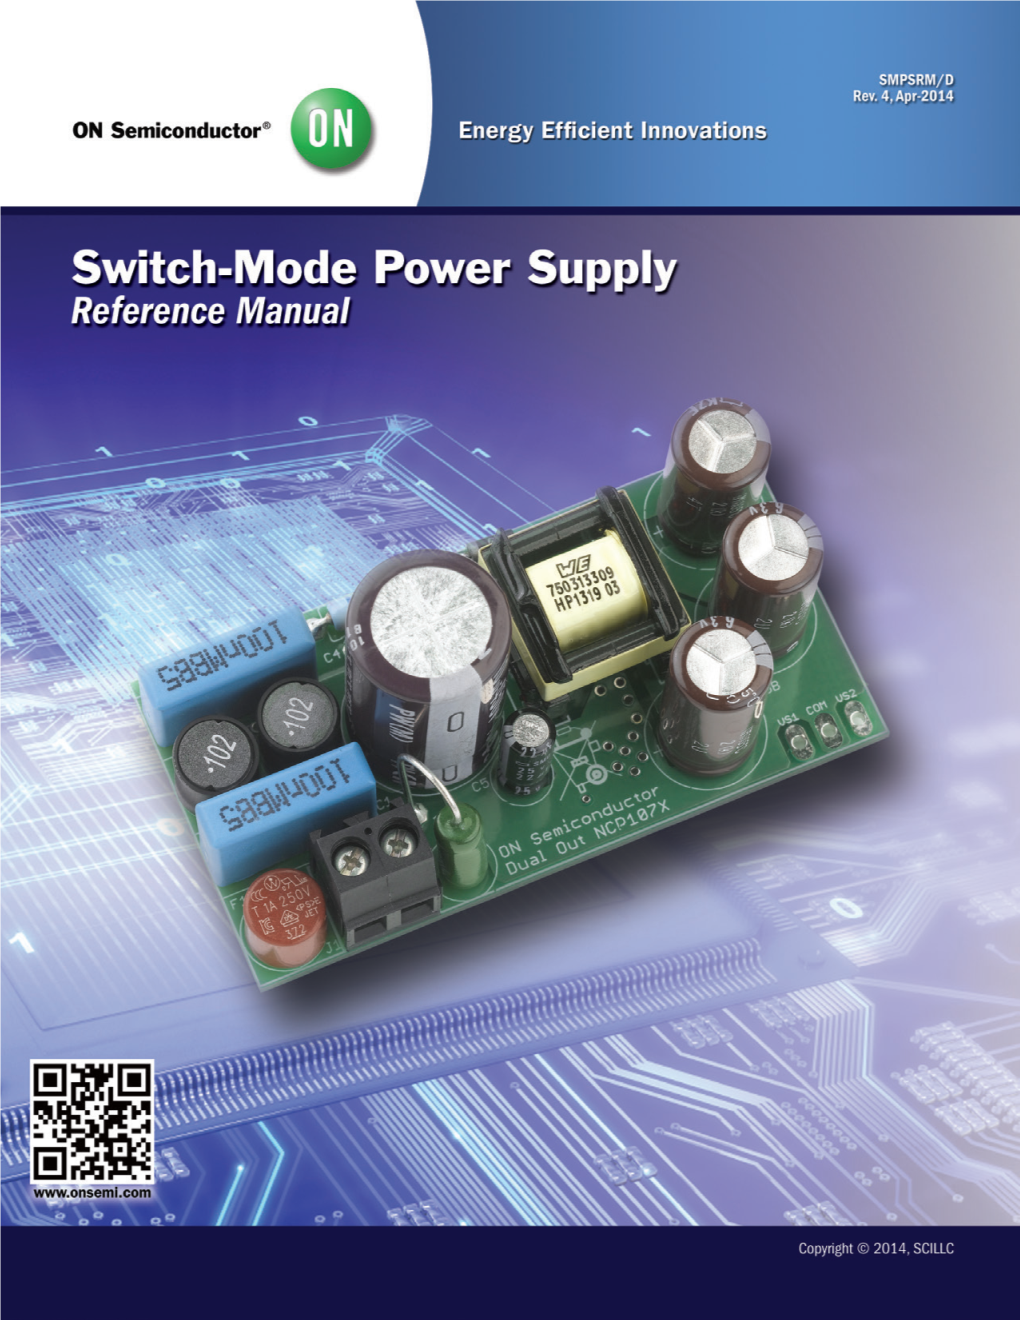 Switch-Mode Power Supply, Reference Manual